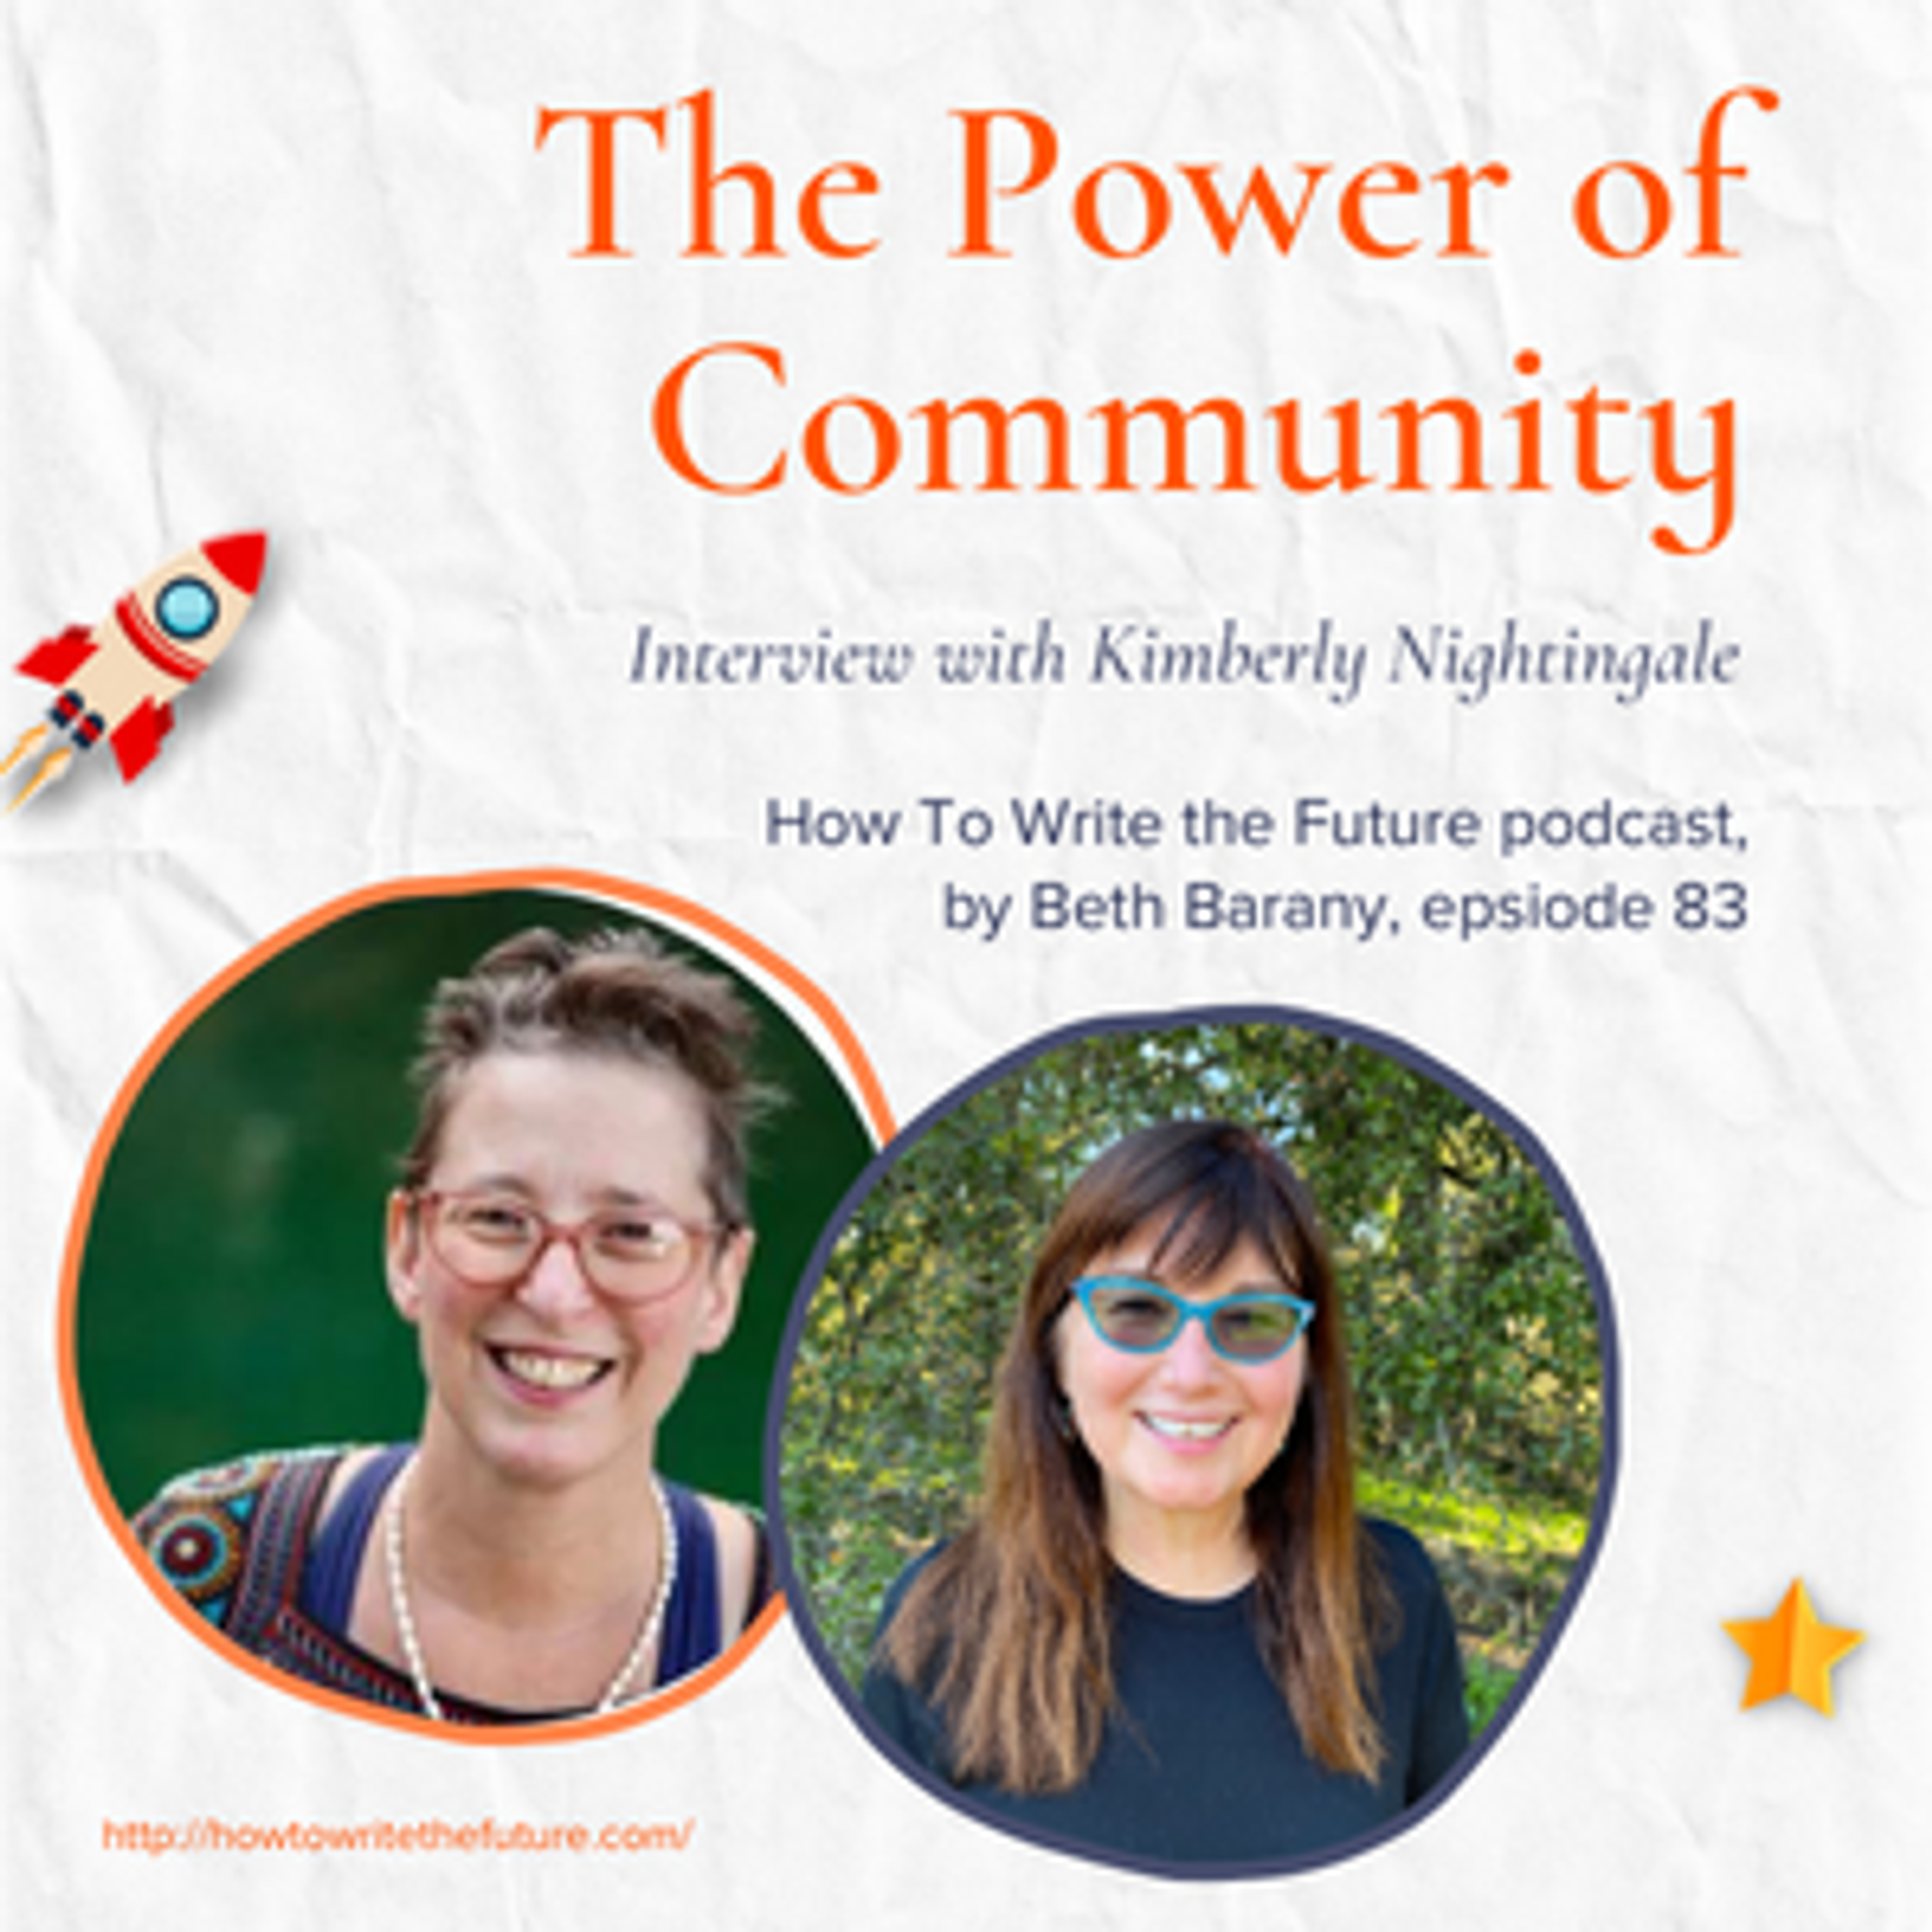 The Power of Community, Interview with Kimberly Nightingale, by Beth Barany, for the How To Write The Future podcast, Ep. 83